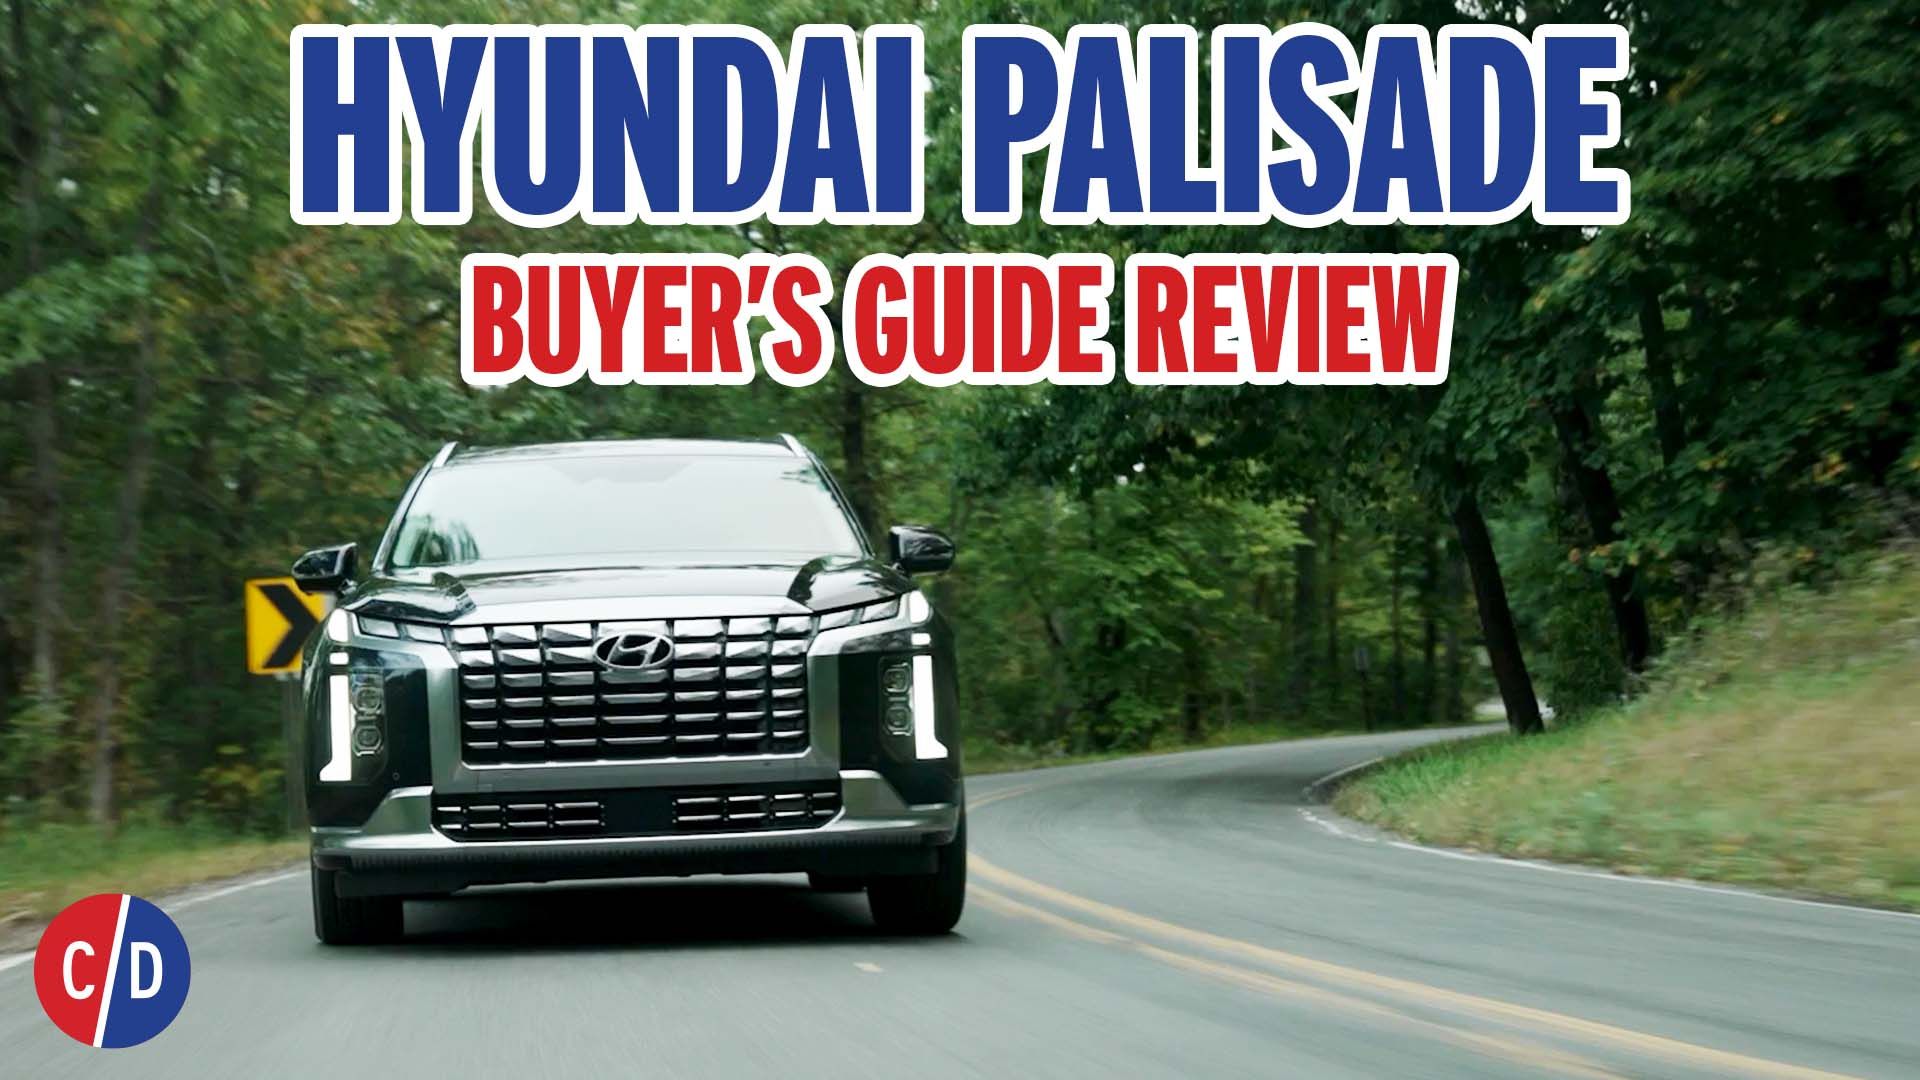 Auto review: Reimagined 2023 Hyundai Palisade delivers, remains a